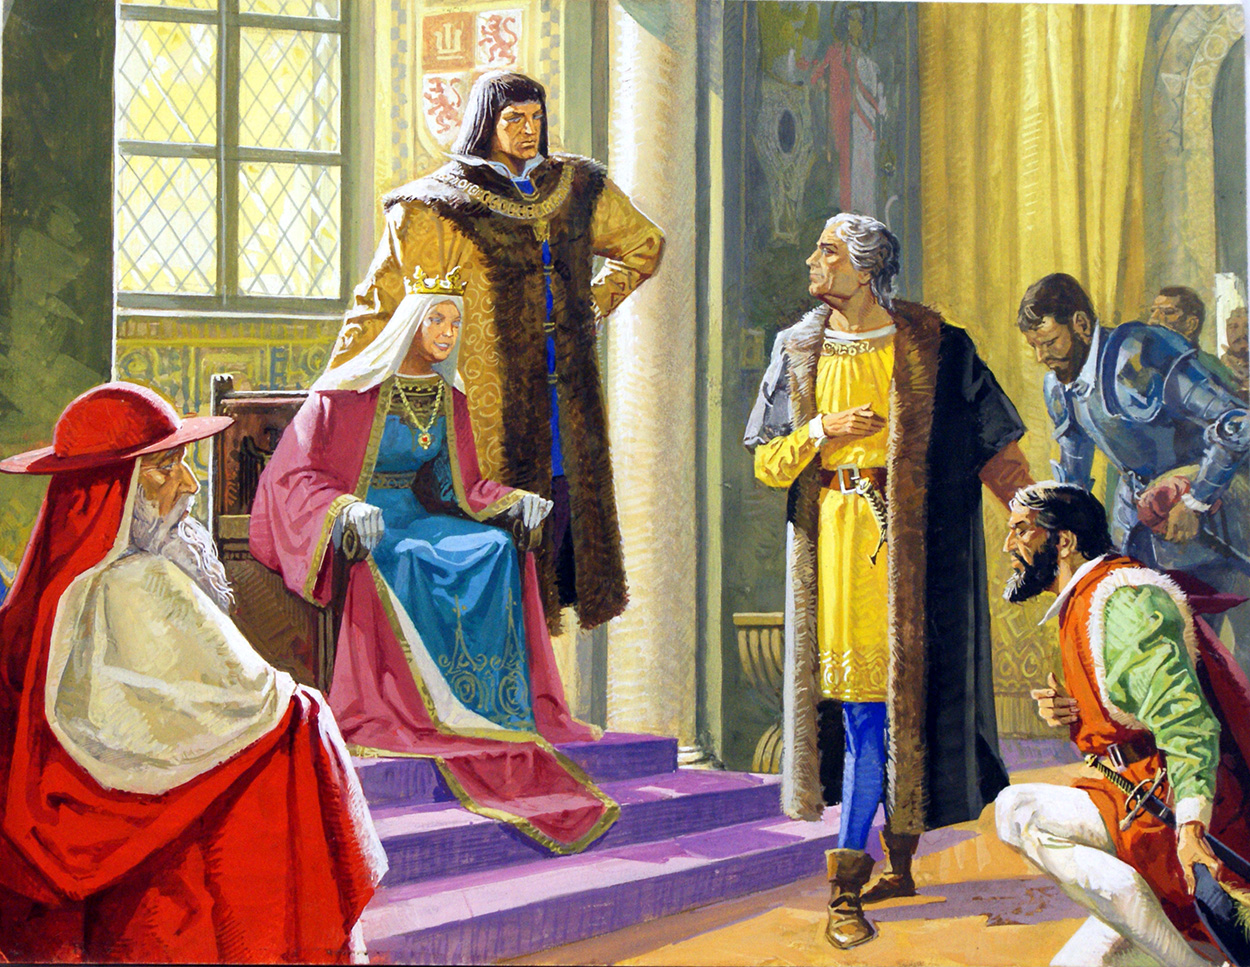 Amerigo Vespucci imagined giving reports of his voyages to Queen Isabella of Spain (Original) art by American History (Baraldi) at The Illustration Art Gallery